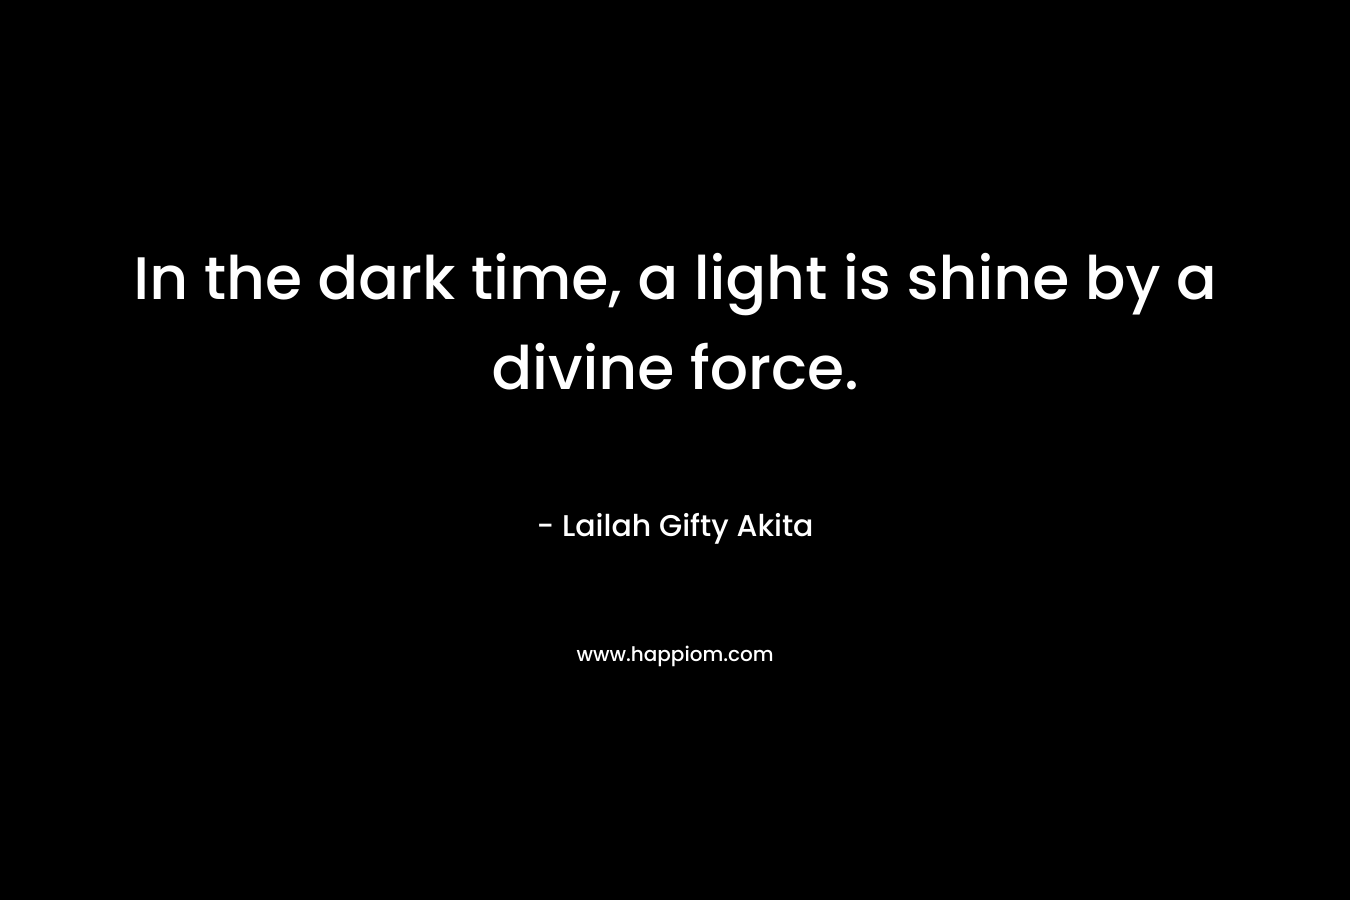 In the dark time, a light is shine by a divine force.